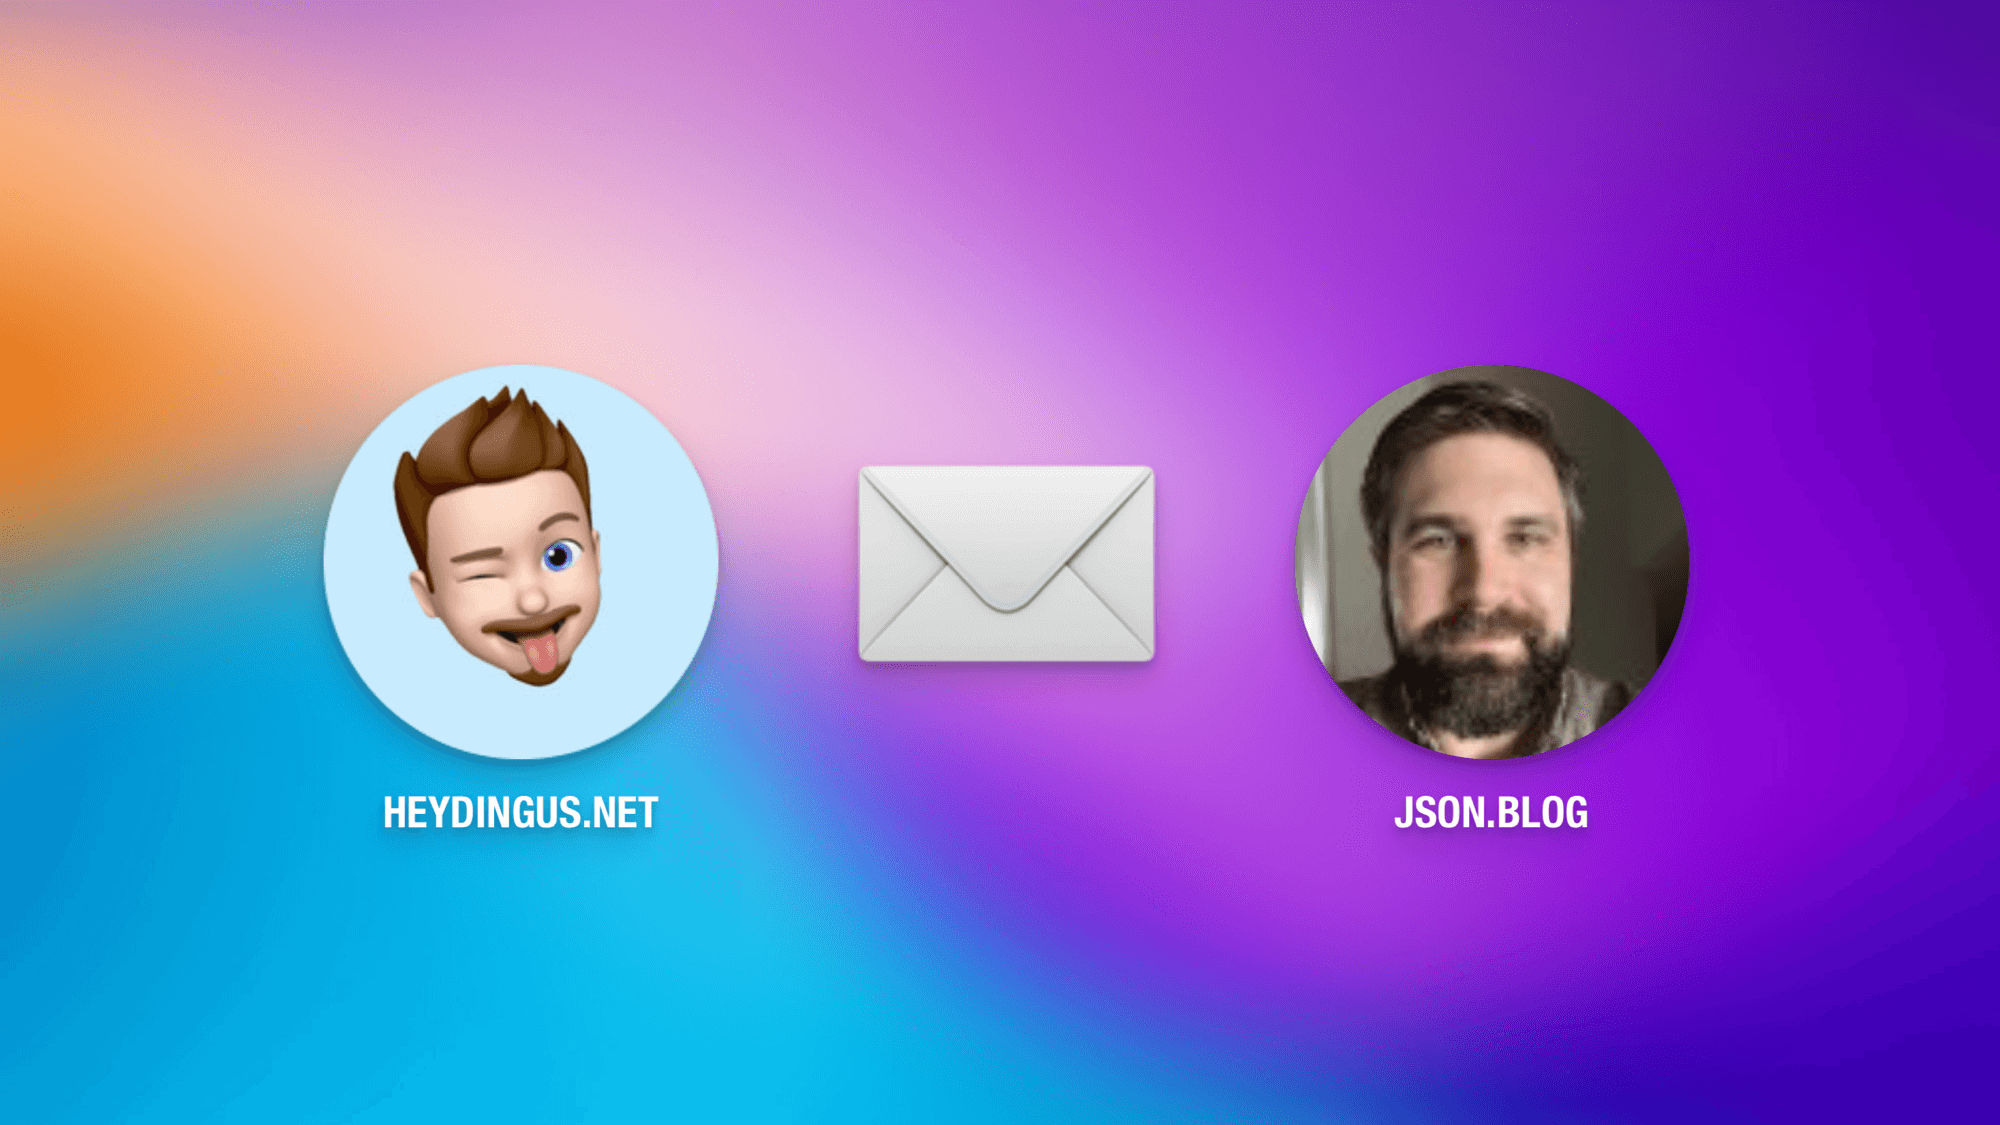 Jarrod’s and Jason’s avatars separated by the letter emoji and their website domains below their images.